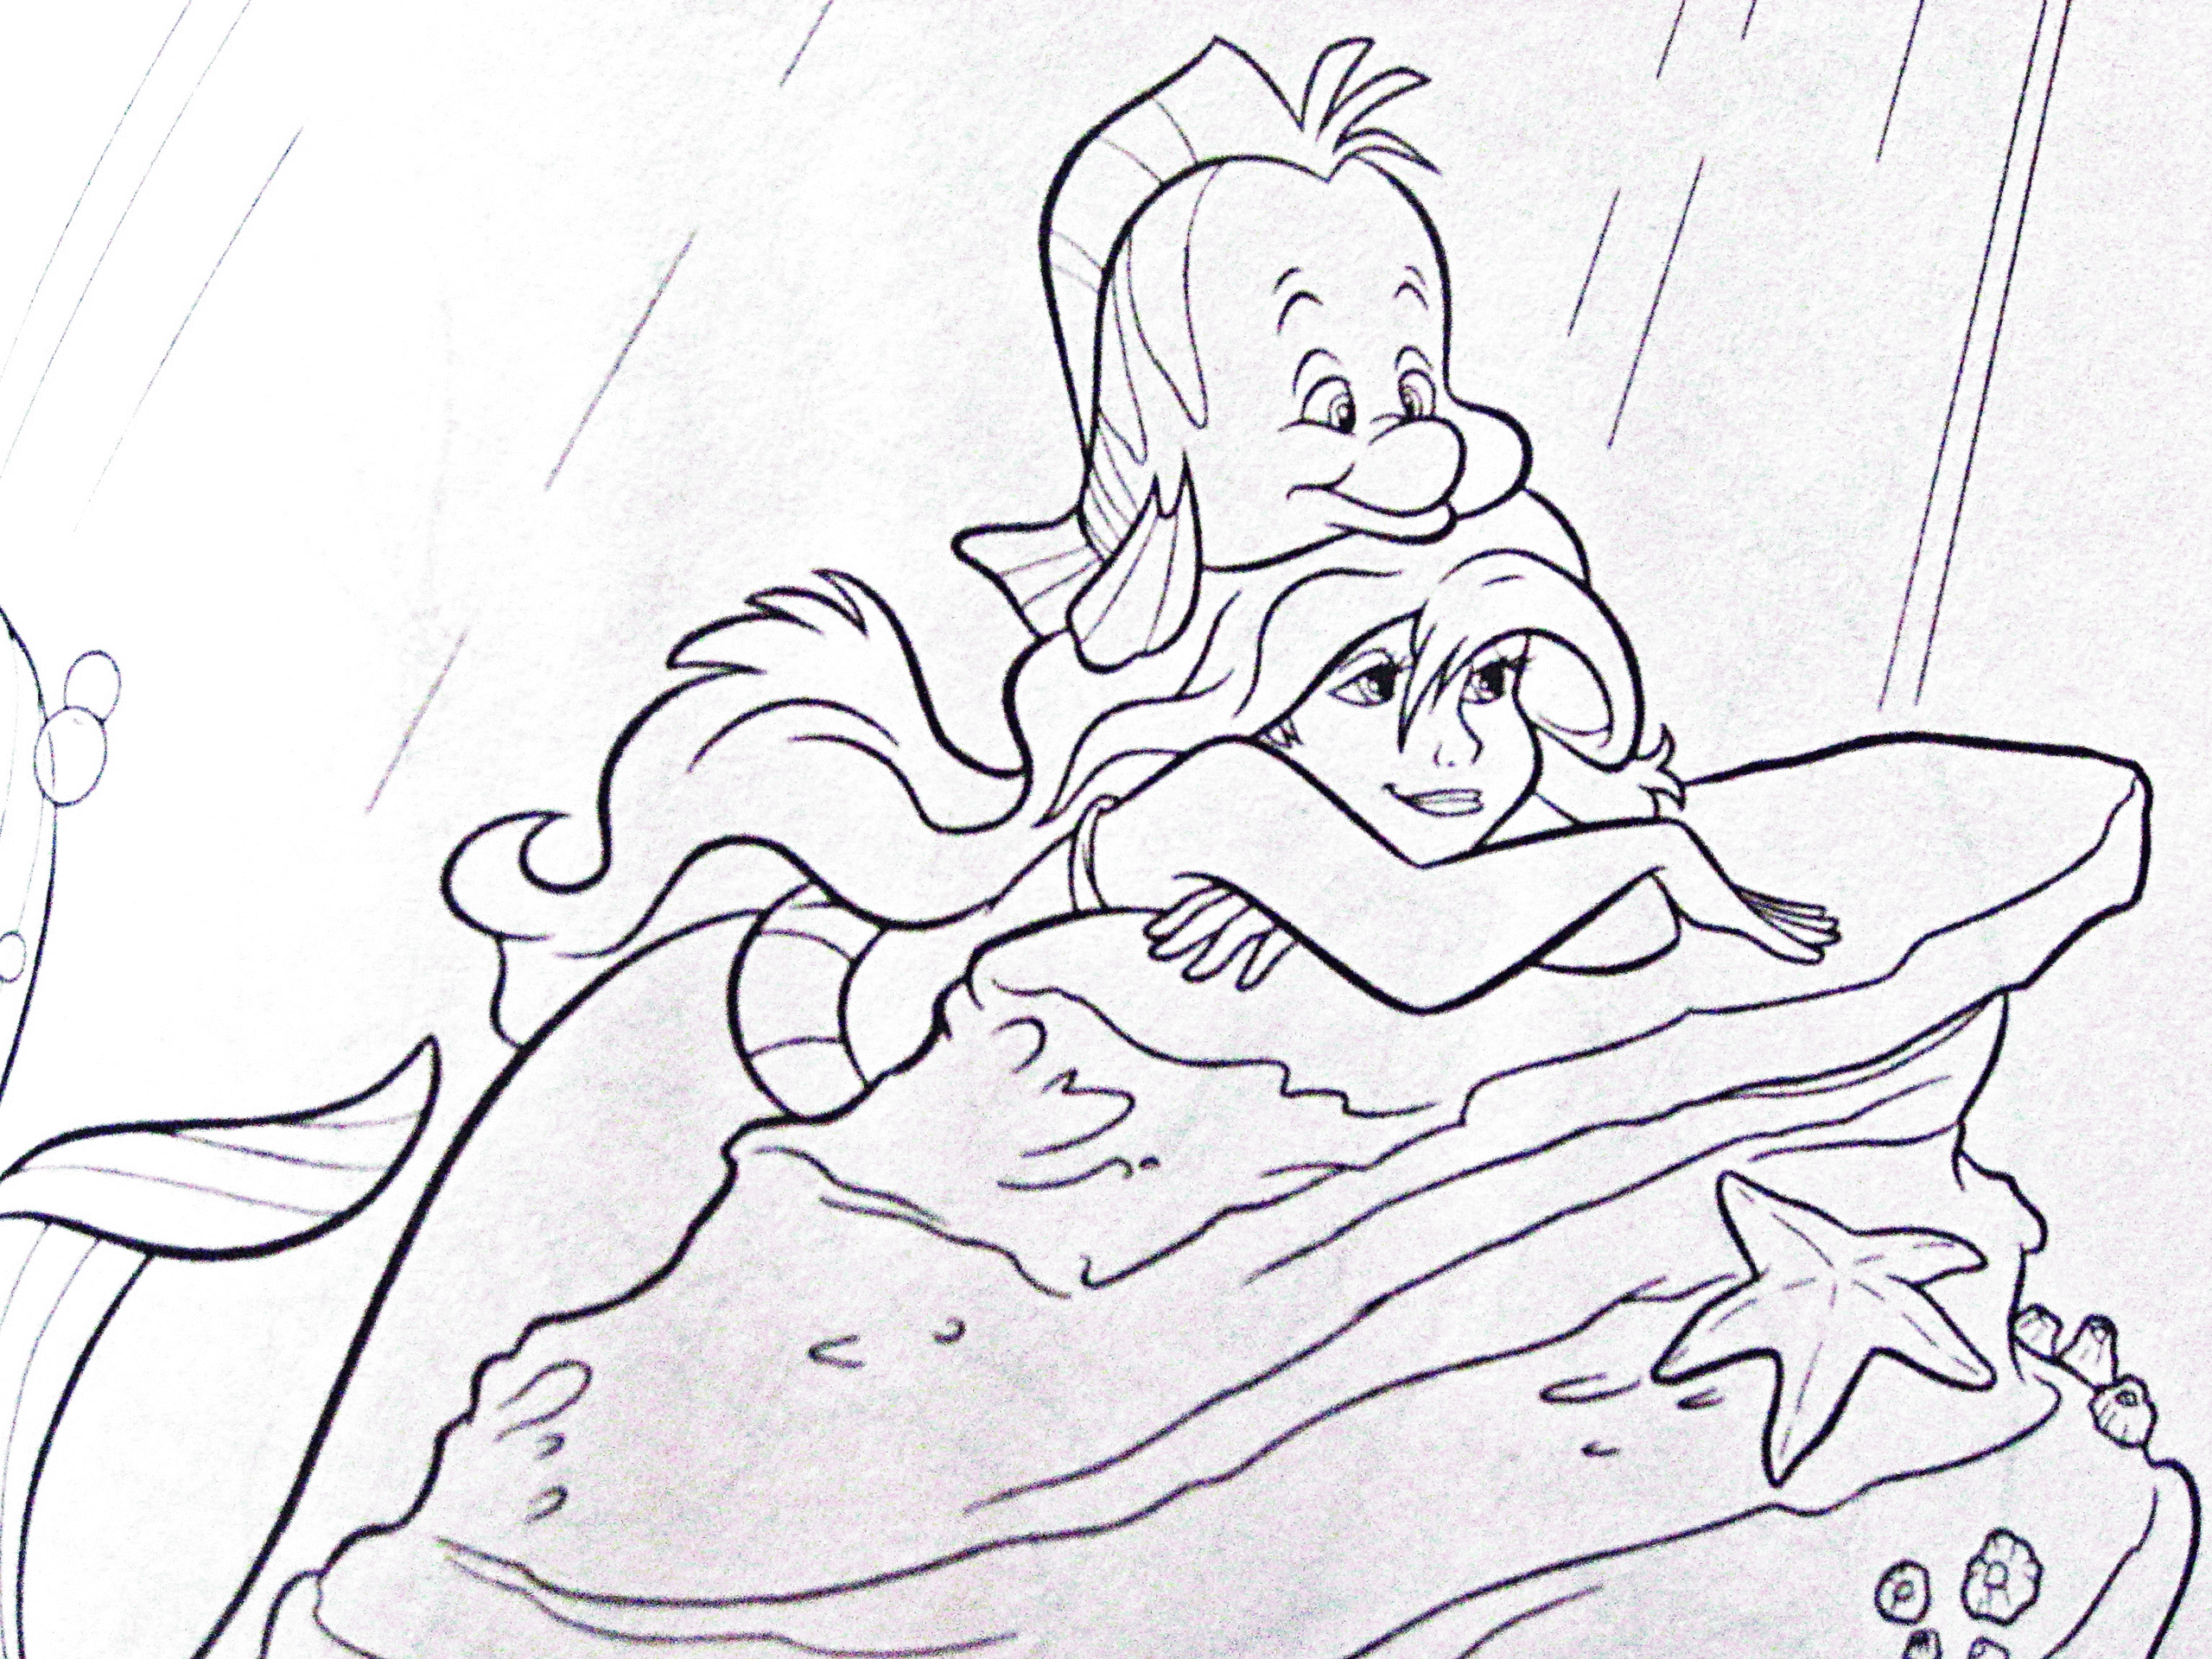 Ariel And Flounder - Coloring Pages for Kids and for Adults